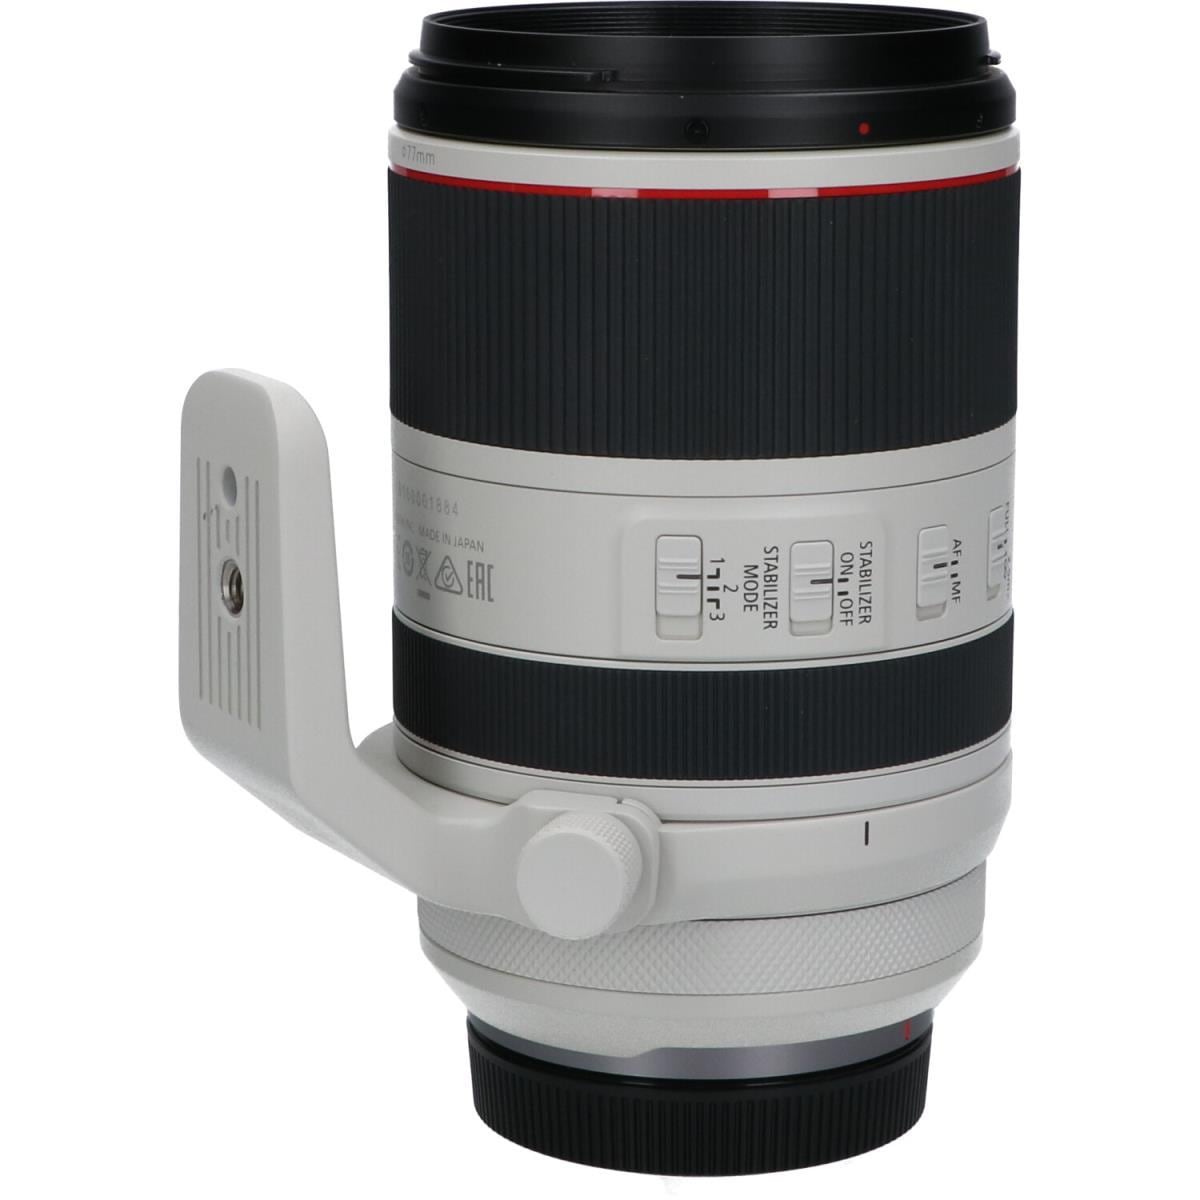 CANON RF70-200mm F2.8L IS USM